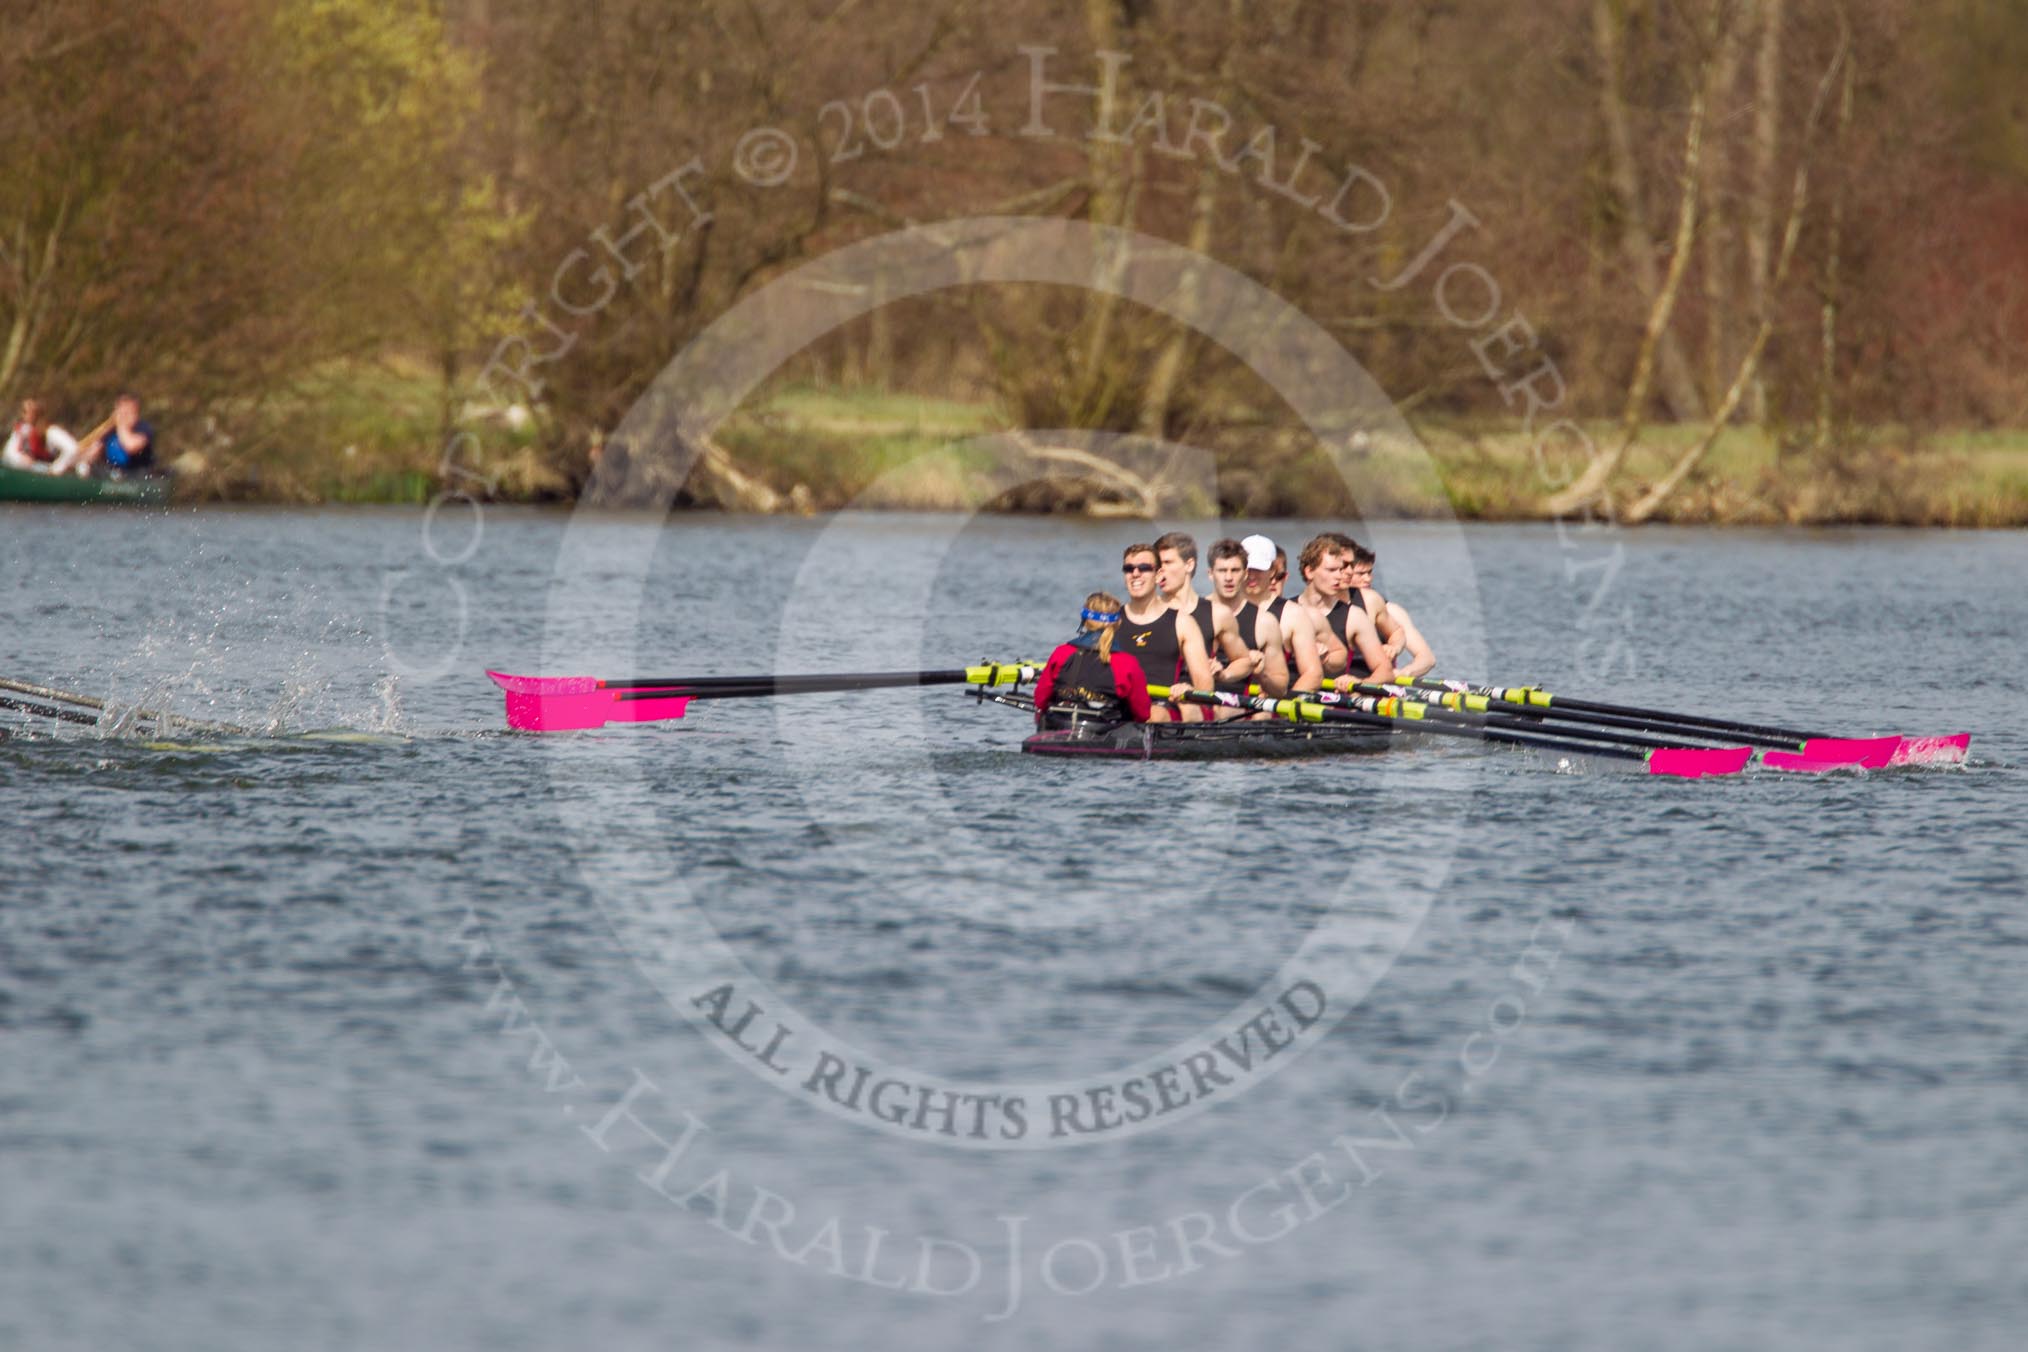 The Women's Boat Race and Henley Boat Races 2014: The Intercollegiate men's race. Downing College (Cambridge) approaching the finish line..
River Thames,
Henley-on-Thames,
Buckinghamshire,
United Kingdom,
on 30 March 2014 at 13:52, image #116